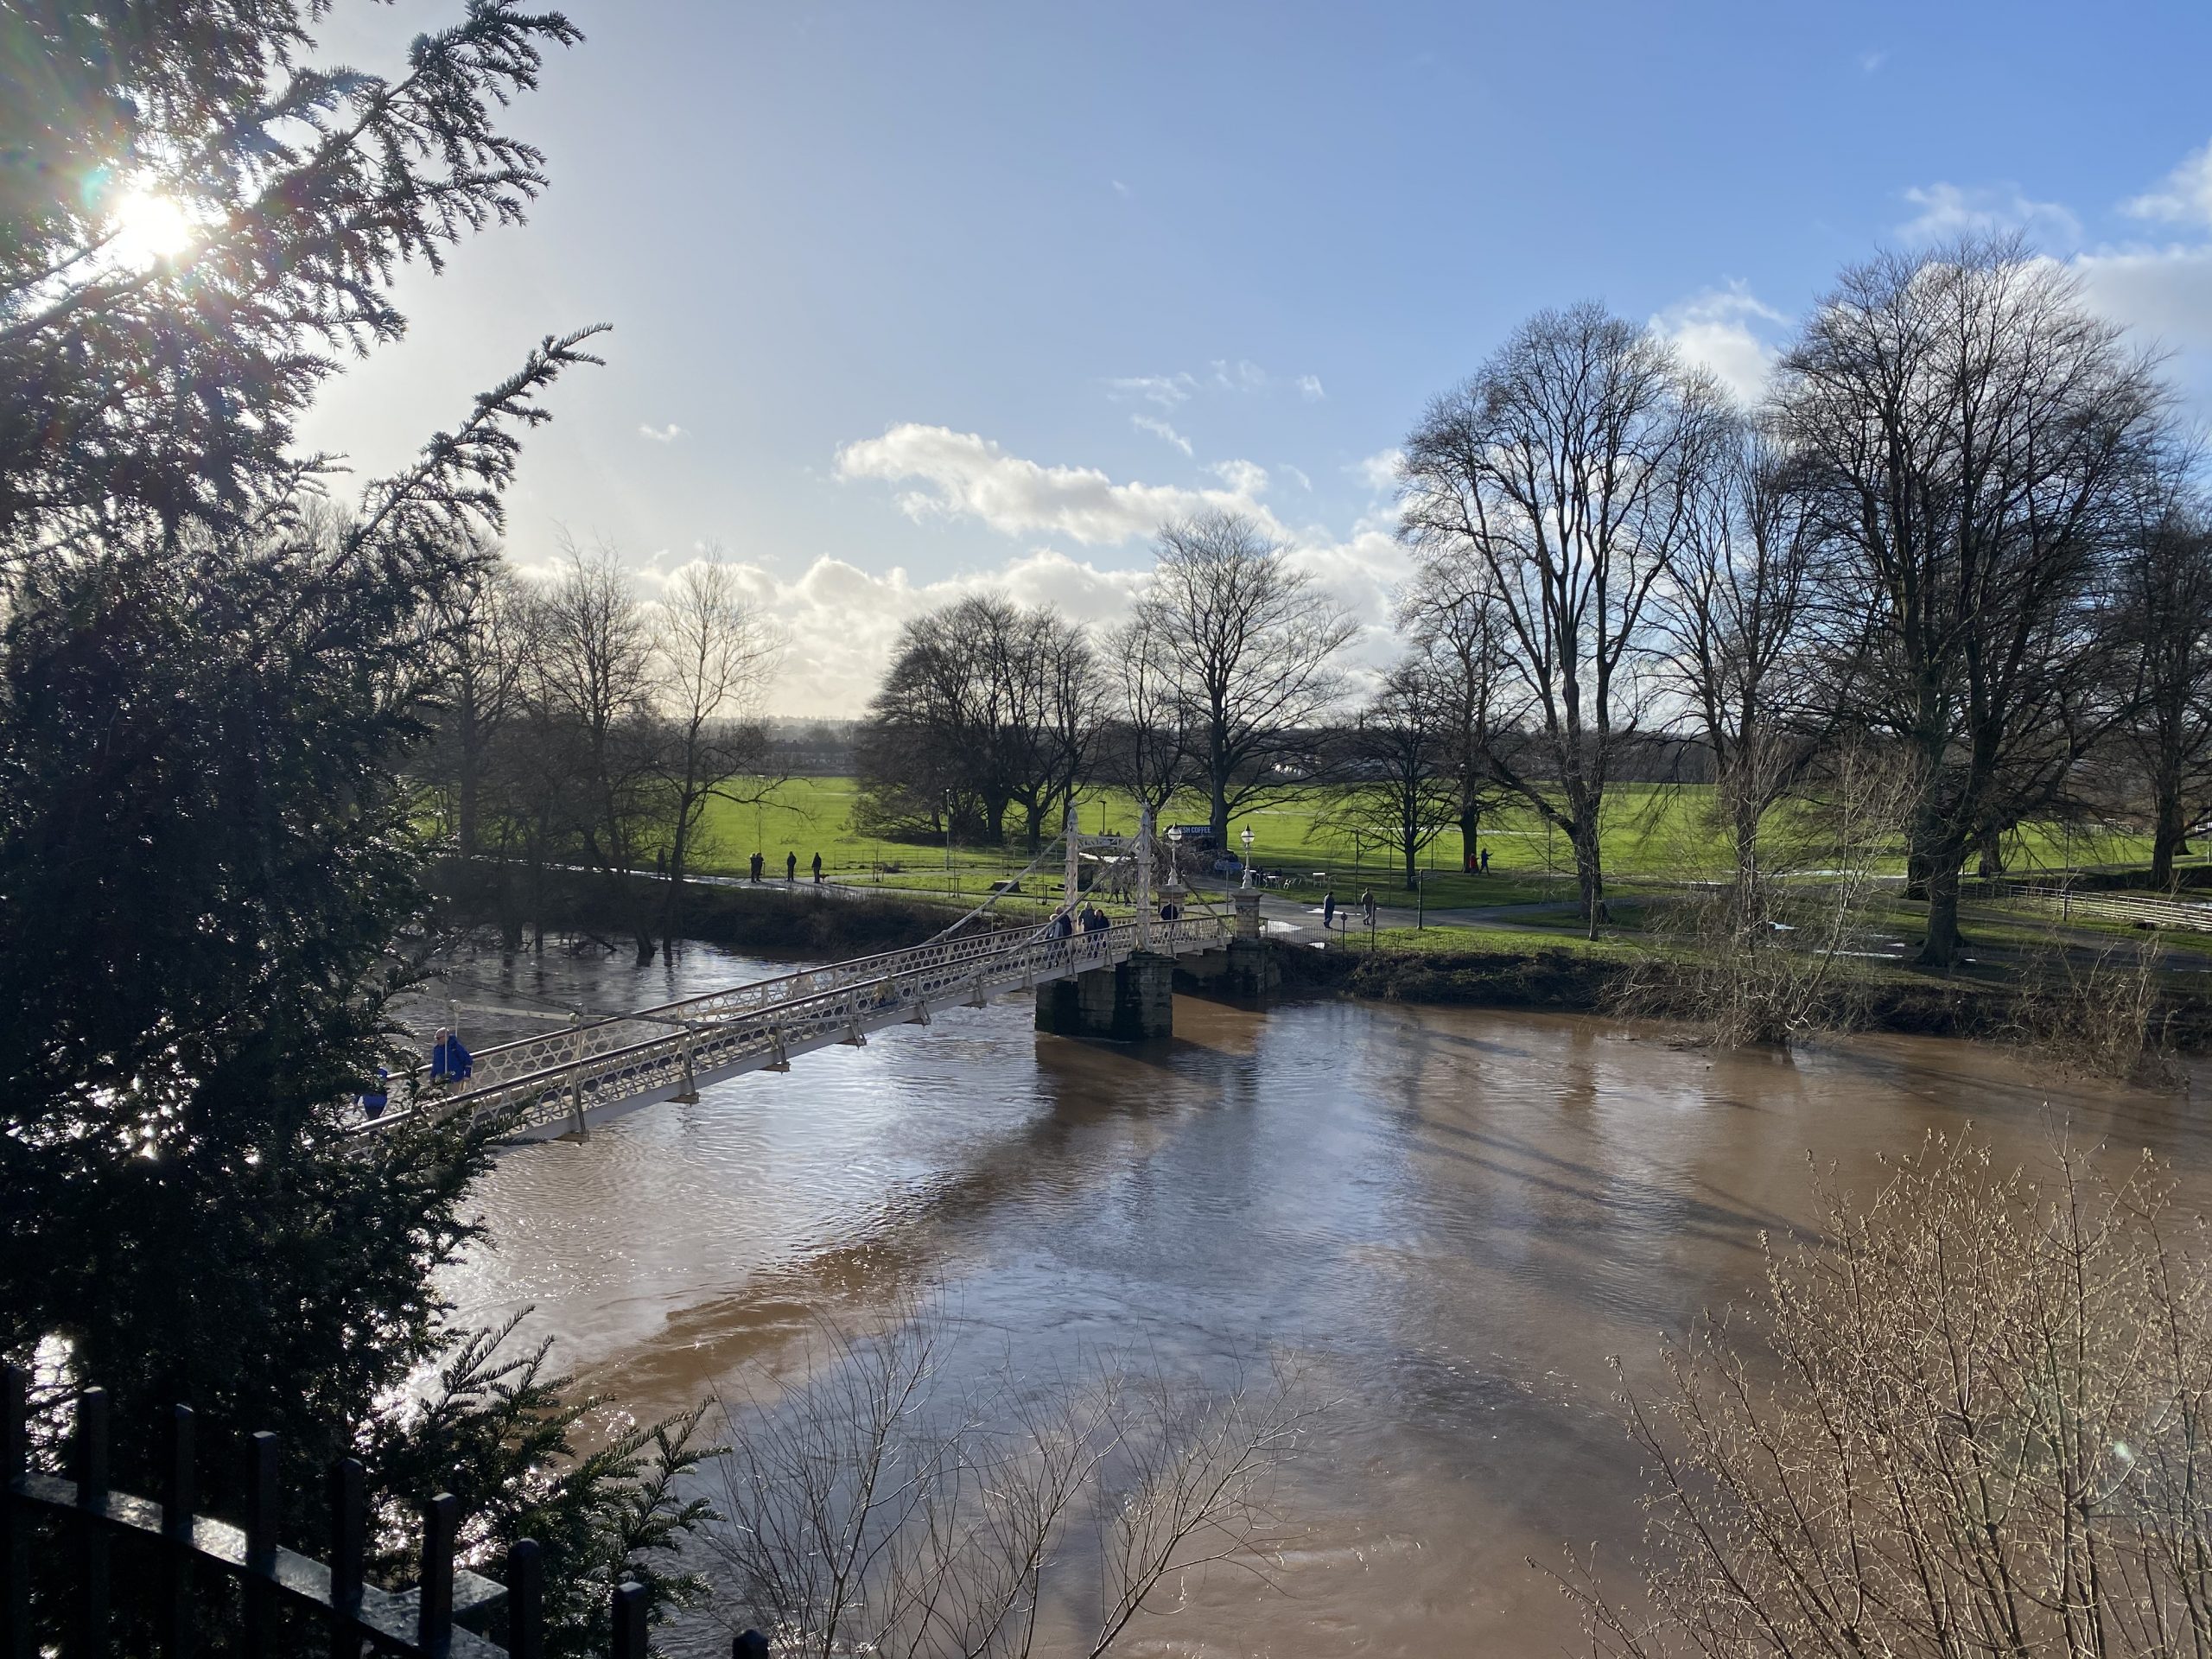 FLOOD WATCH | River Wye in Herefordshire